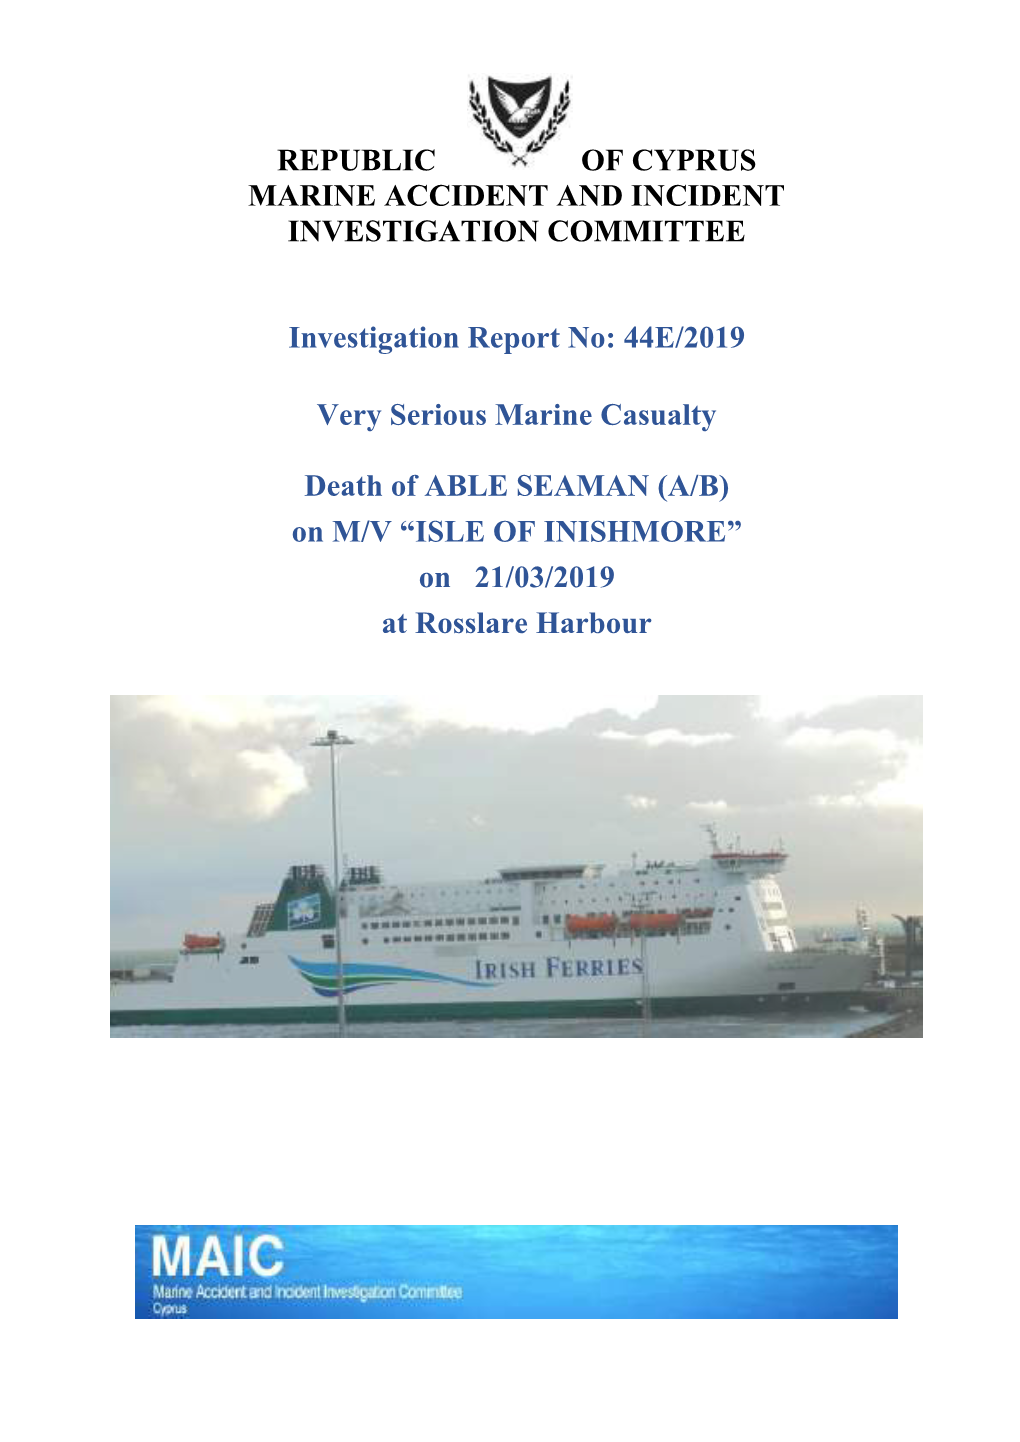 Republic of Cyprus Marine Accident and Incident Investigation Committee